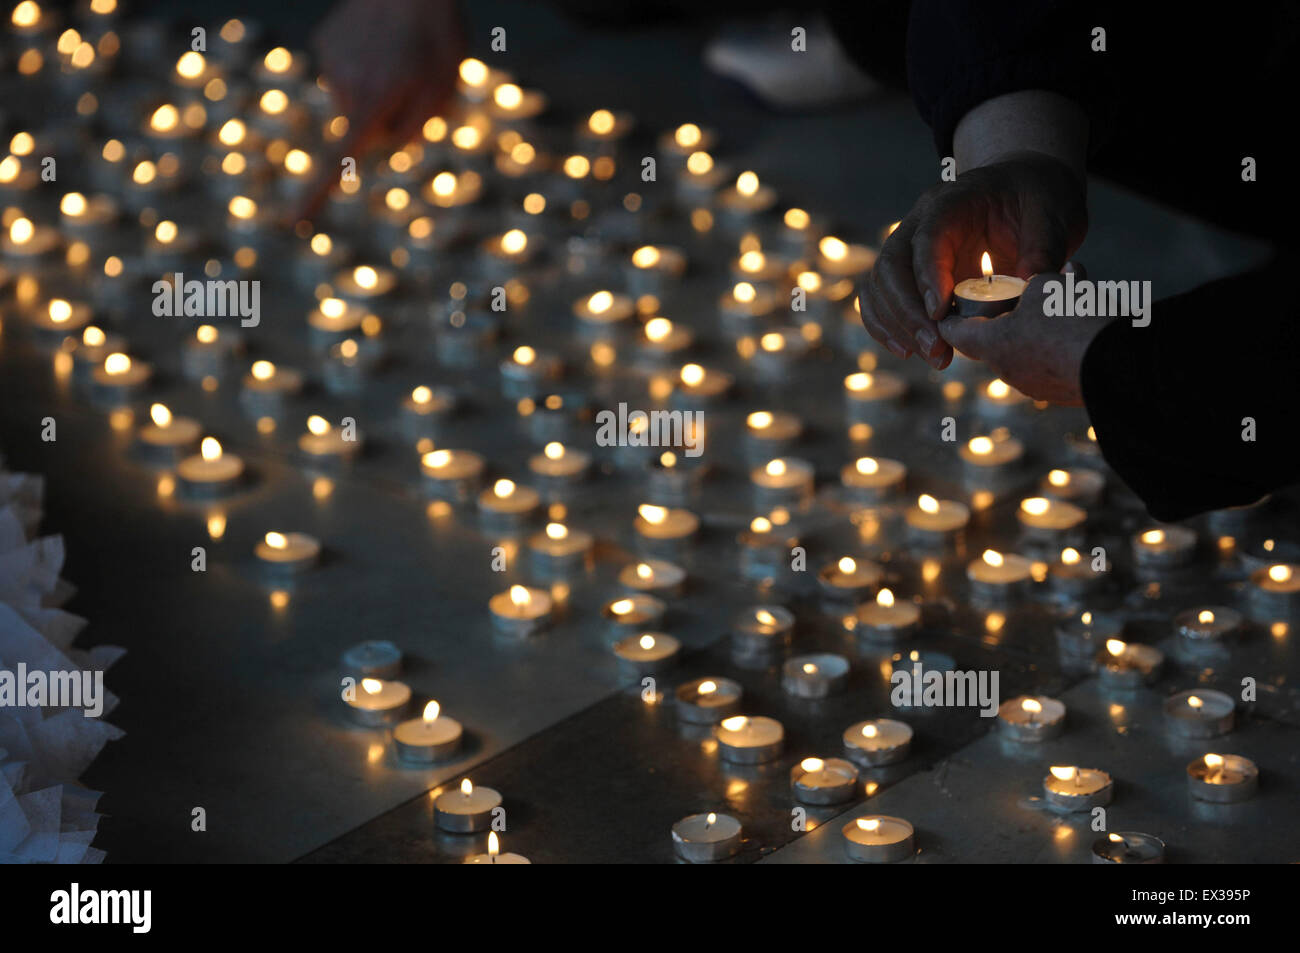 Poeple burn candles during an activity to mourn the victims who died during the Apri 14 Yushu earthquake of Qinghai province, at Stock Photo